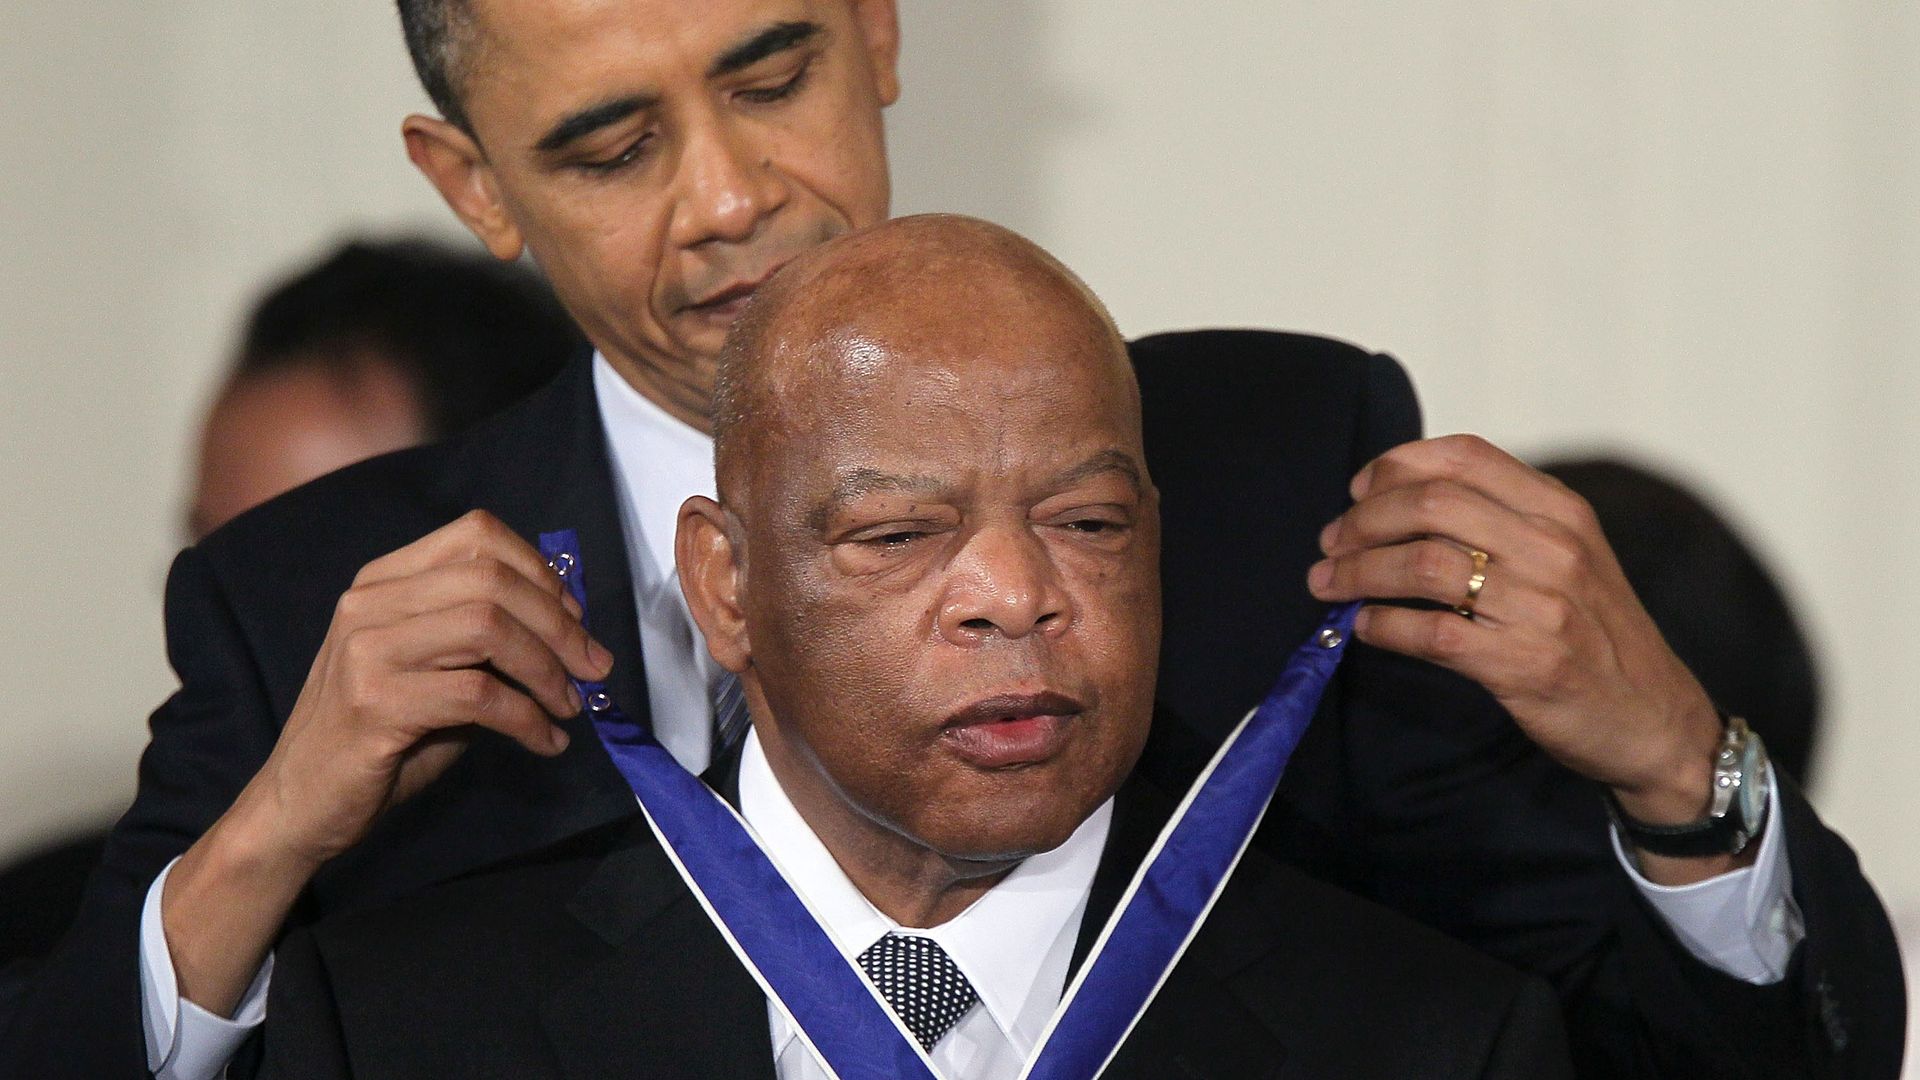 President Obama puts the Medal of Freedom around John Lewis's neck